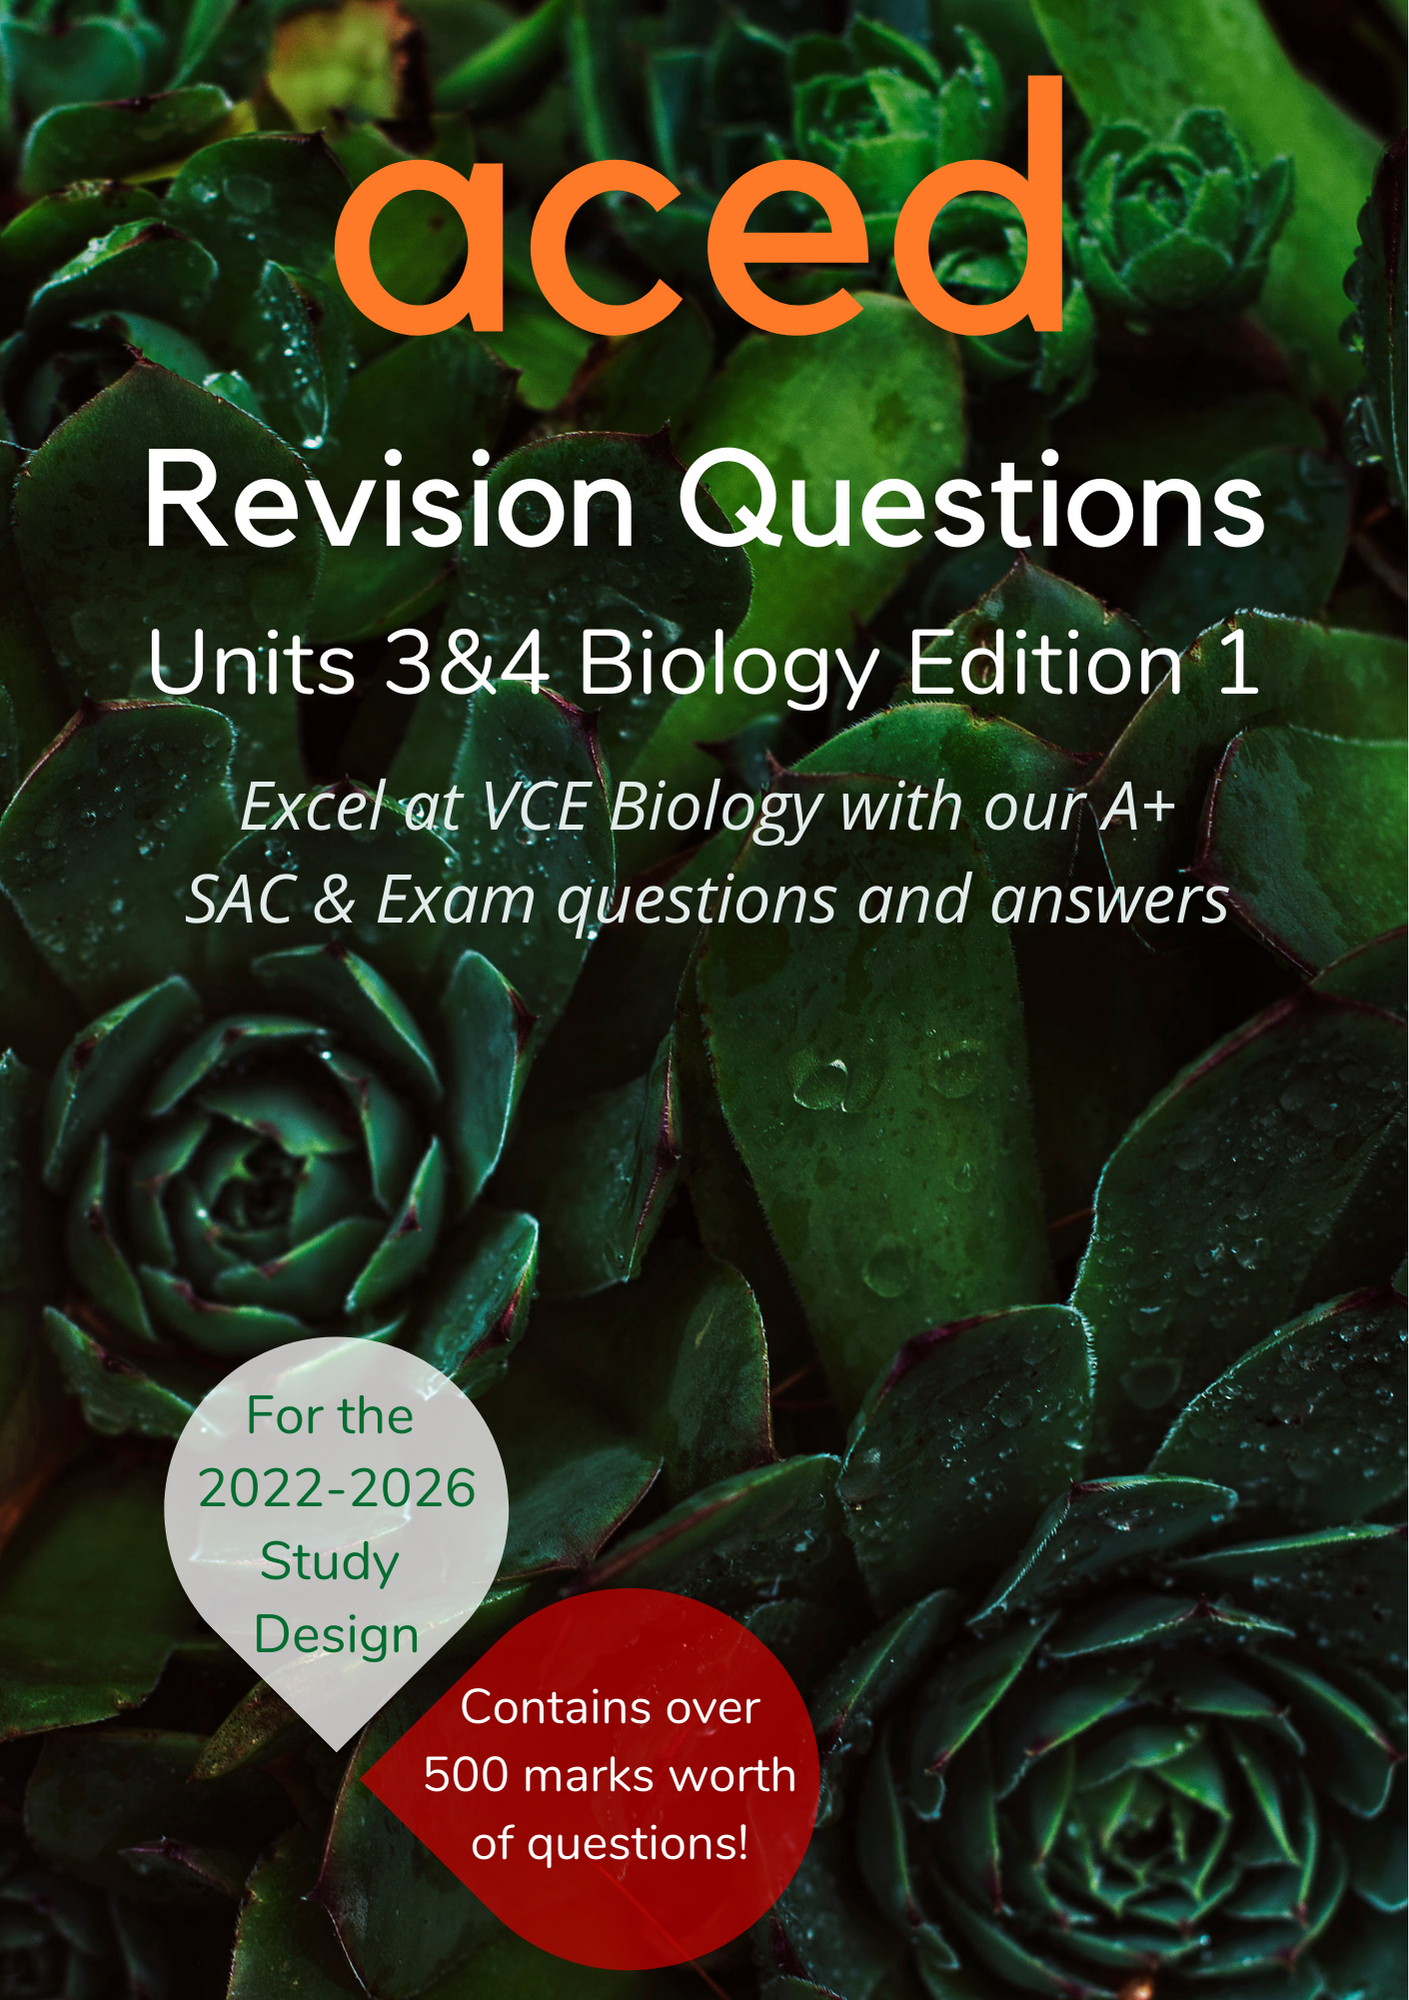 ACED Revision Questions Book - Units 3&4 Biology Edition 1